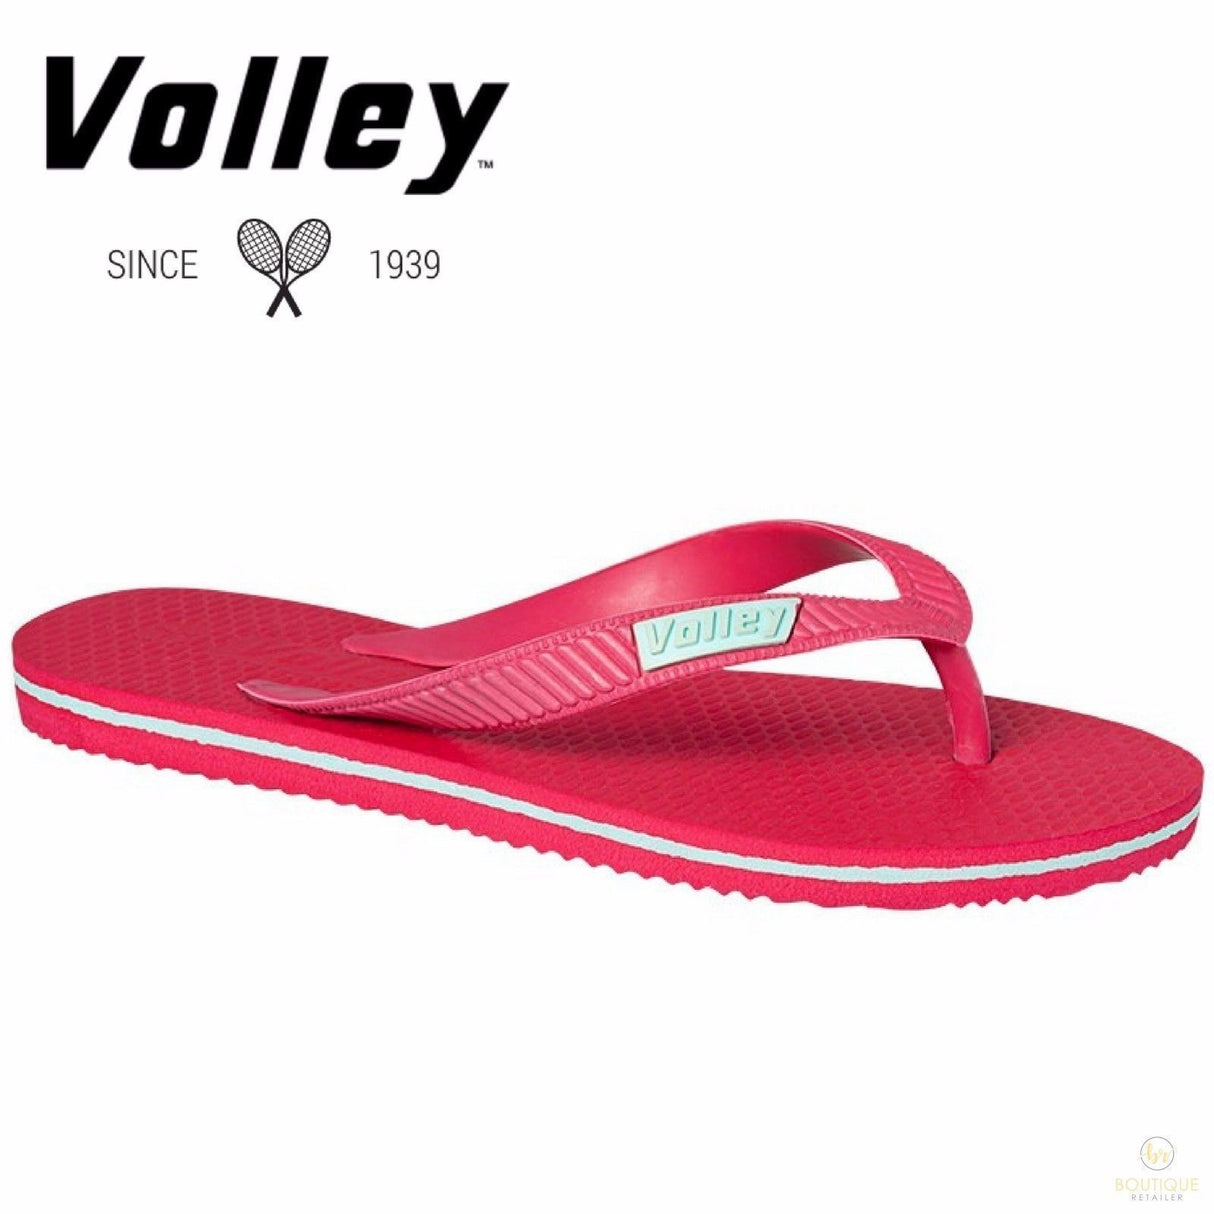 Volley Womens Double Plug Thongs size 5